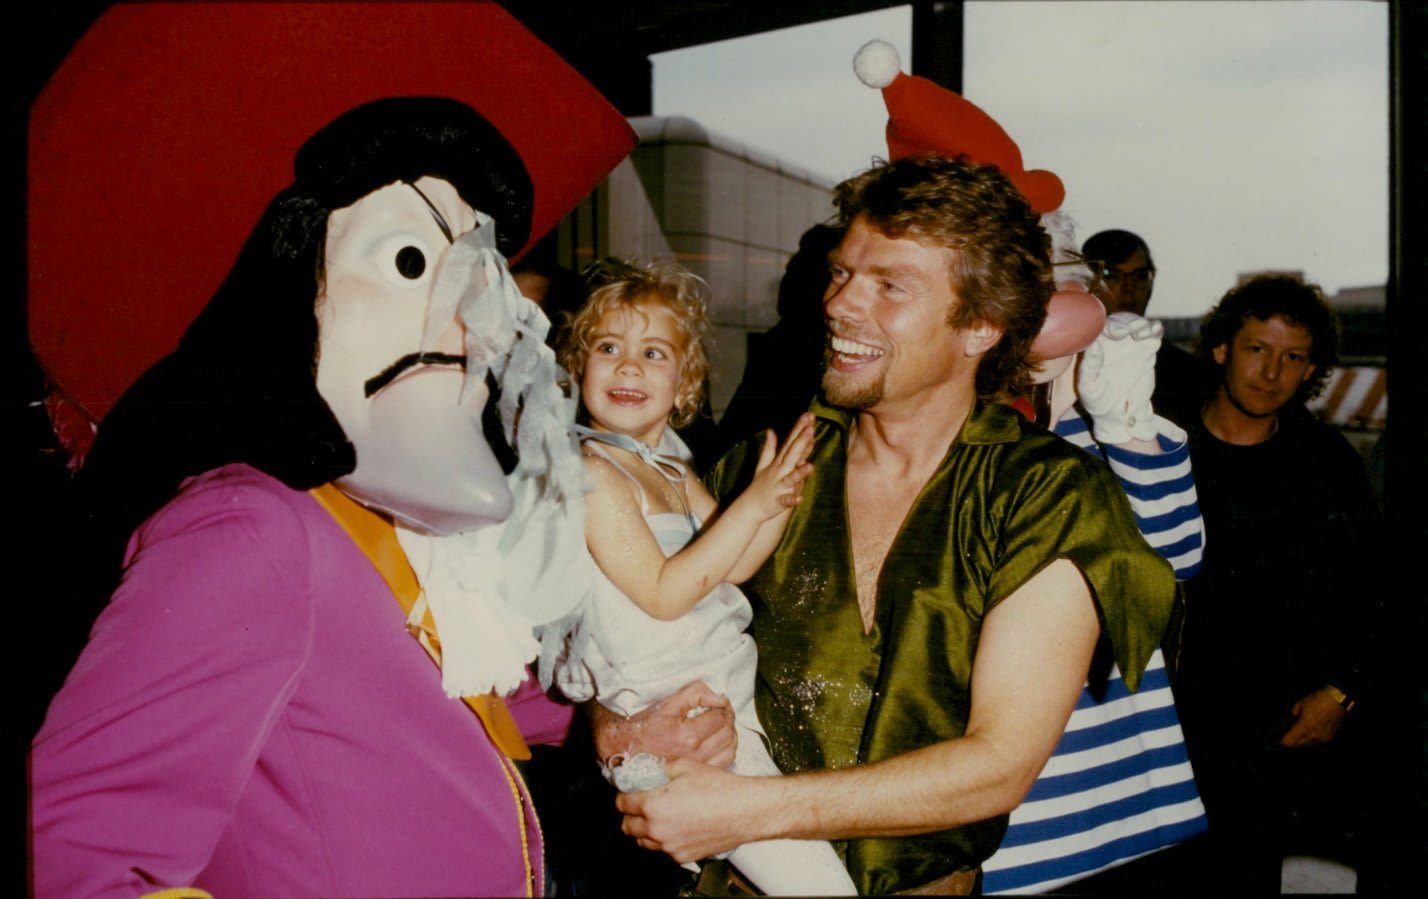 From the archives, Richard Branson is dressed as Peter Pan, he's holding daughter Holly who is dressed as Tinkerbelle and they are meeting the character Captain Hook